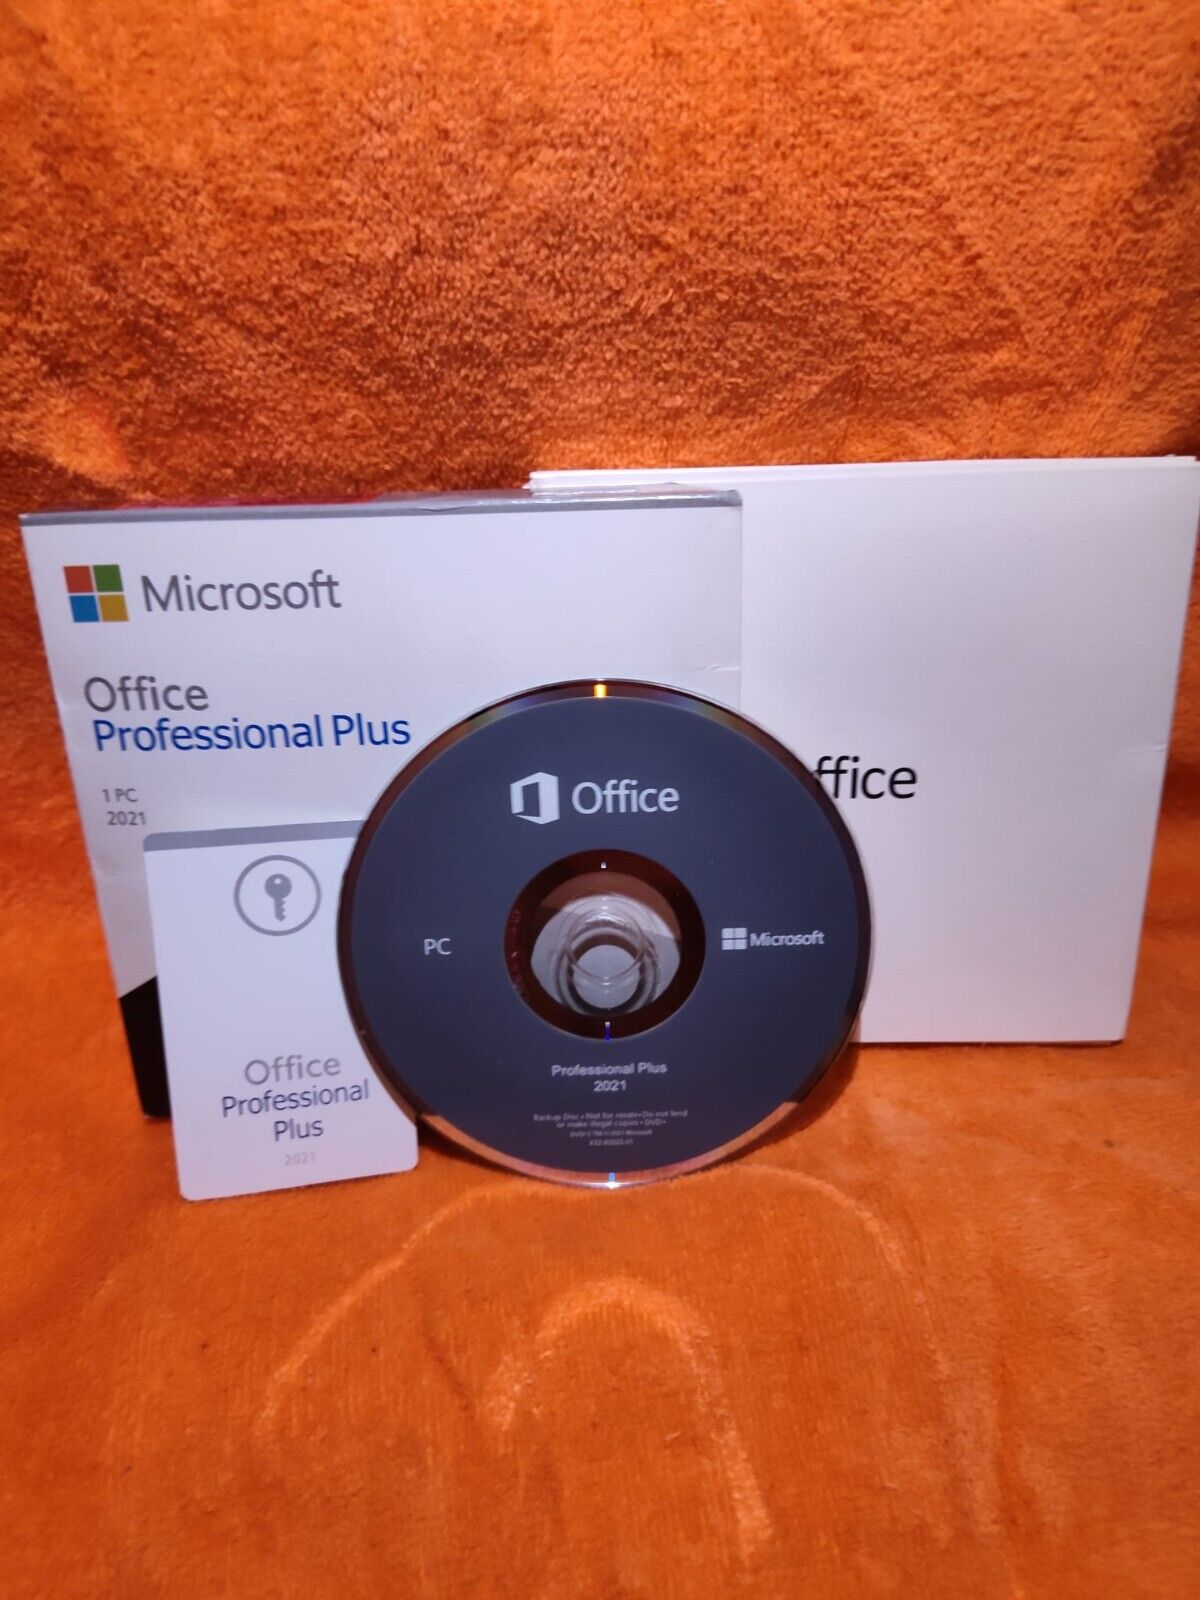 Microsoft Office 2021 Professional Plus DVD + Key Card New Sealed Retail Package